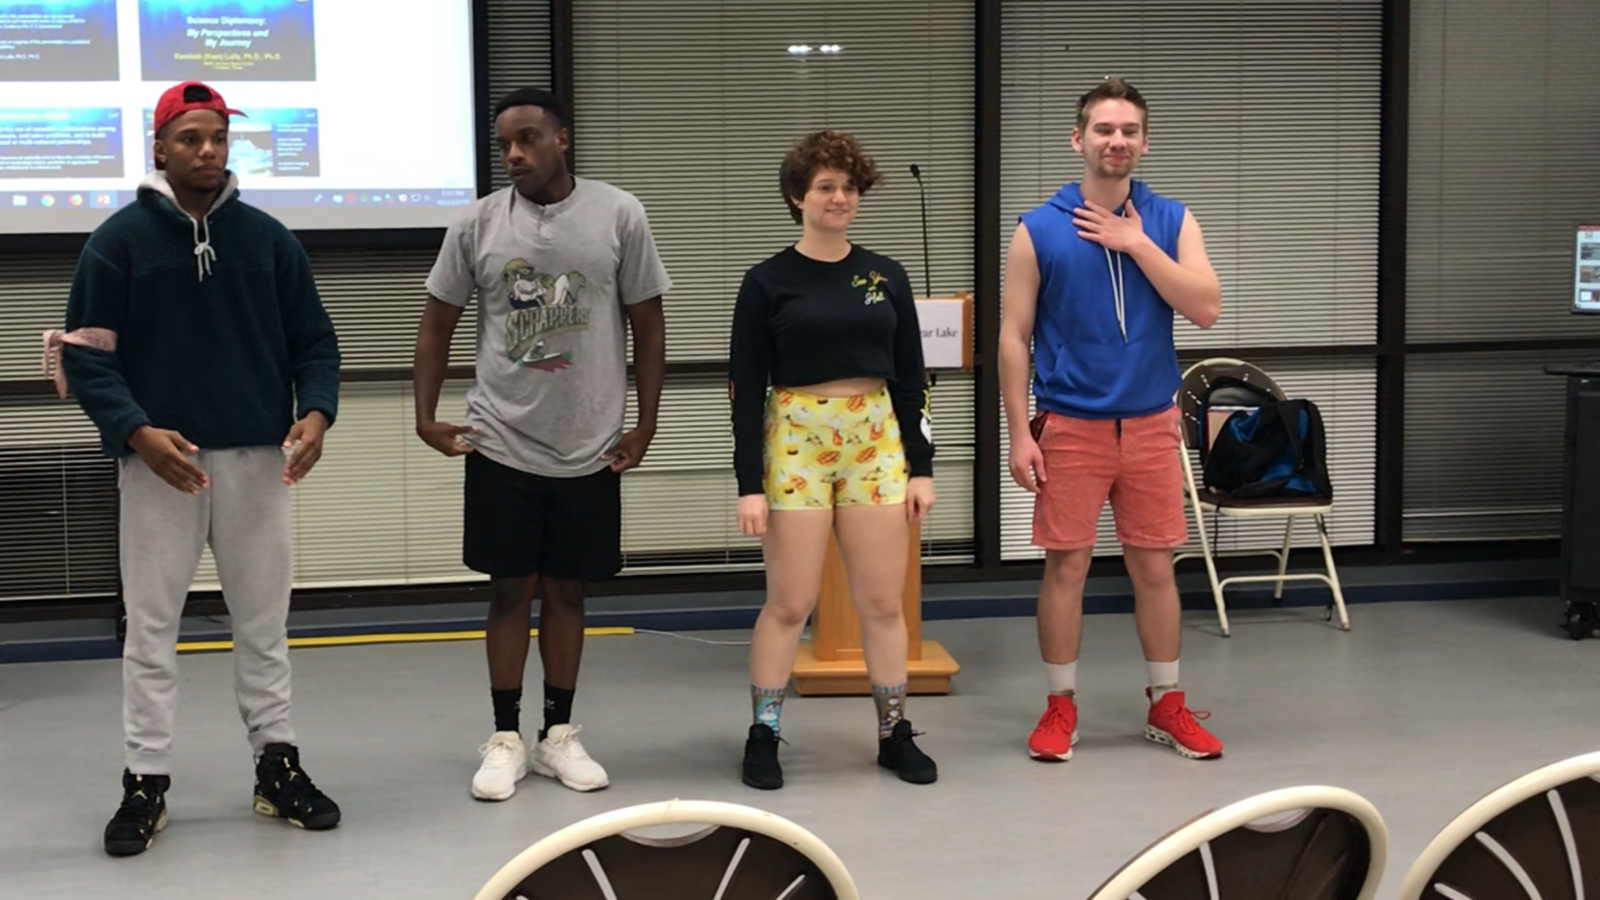 PHOTO: Four cast members of UHCL Storytellers production "Kill Mii" stand side-by-side during show rehearsal. Photo courtesy of UHCL Storytellers